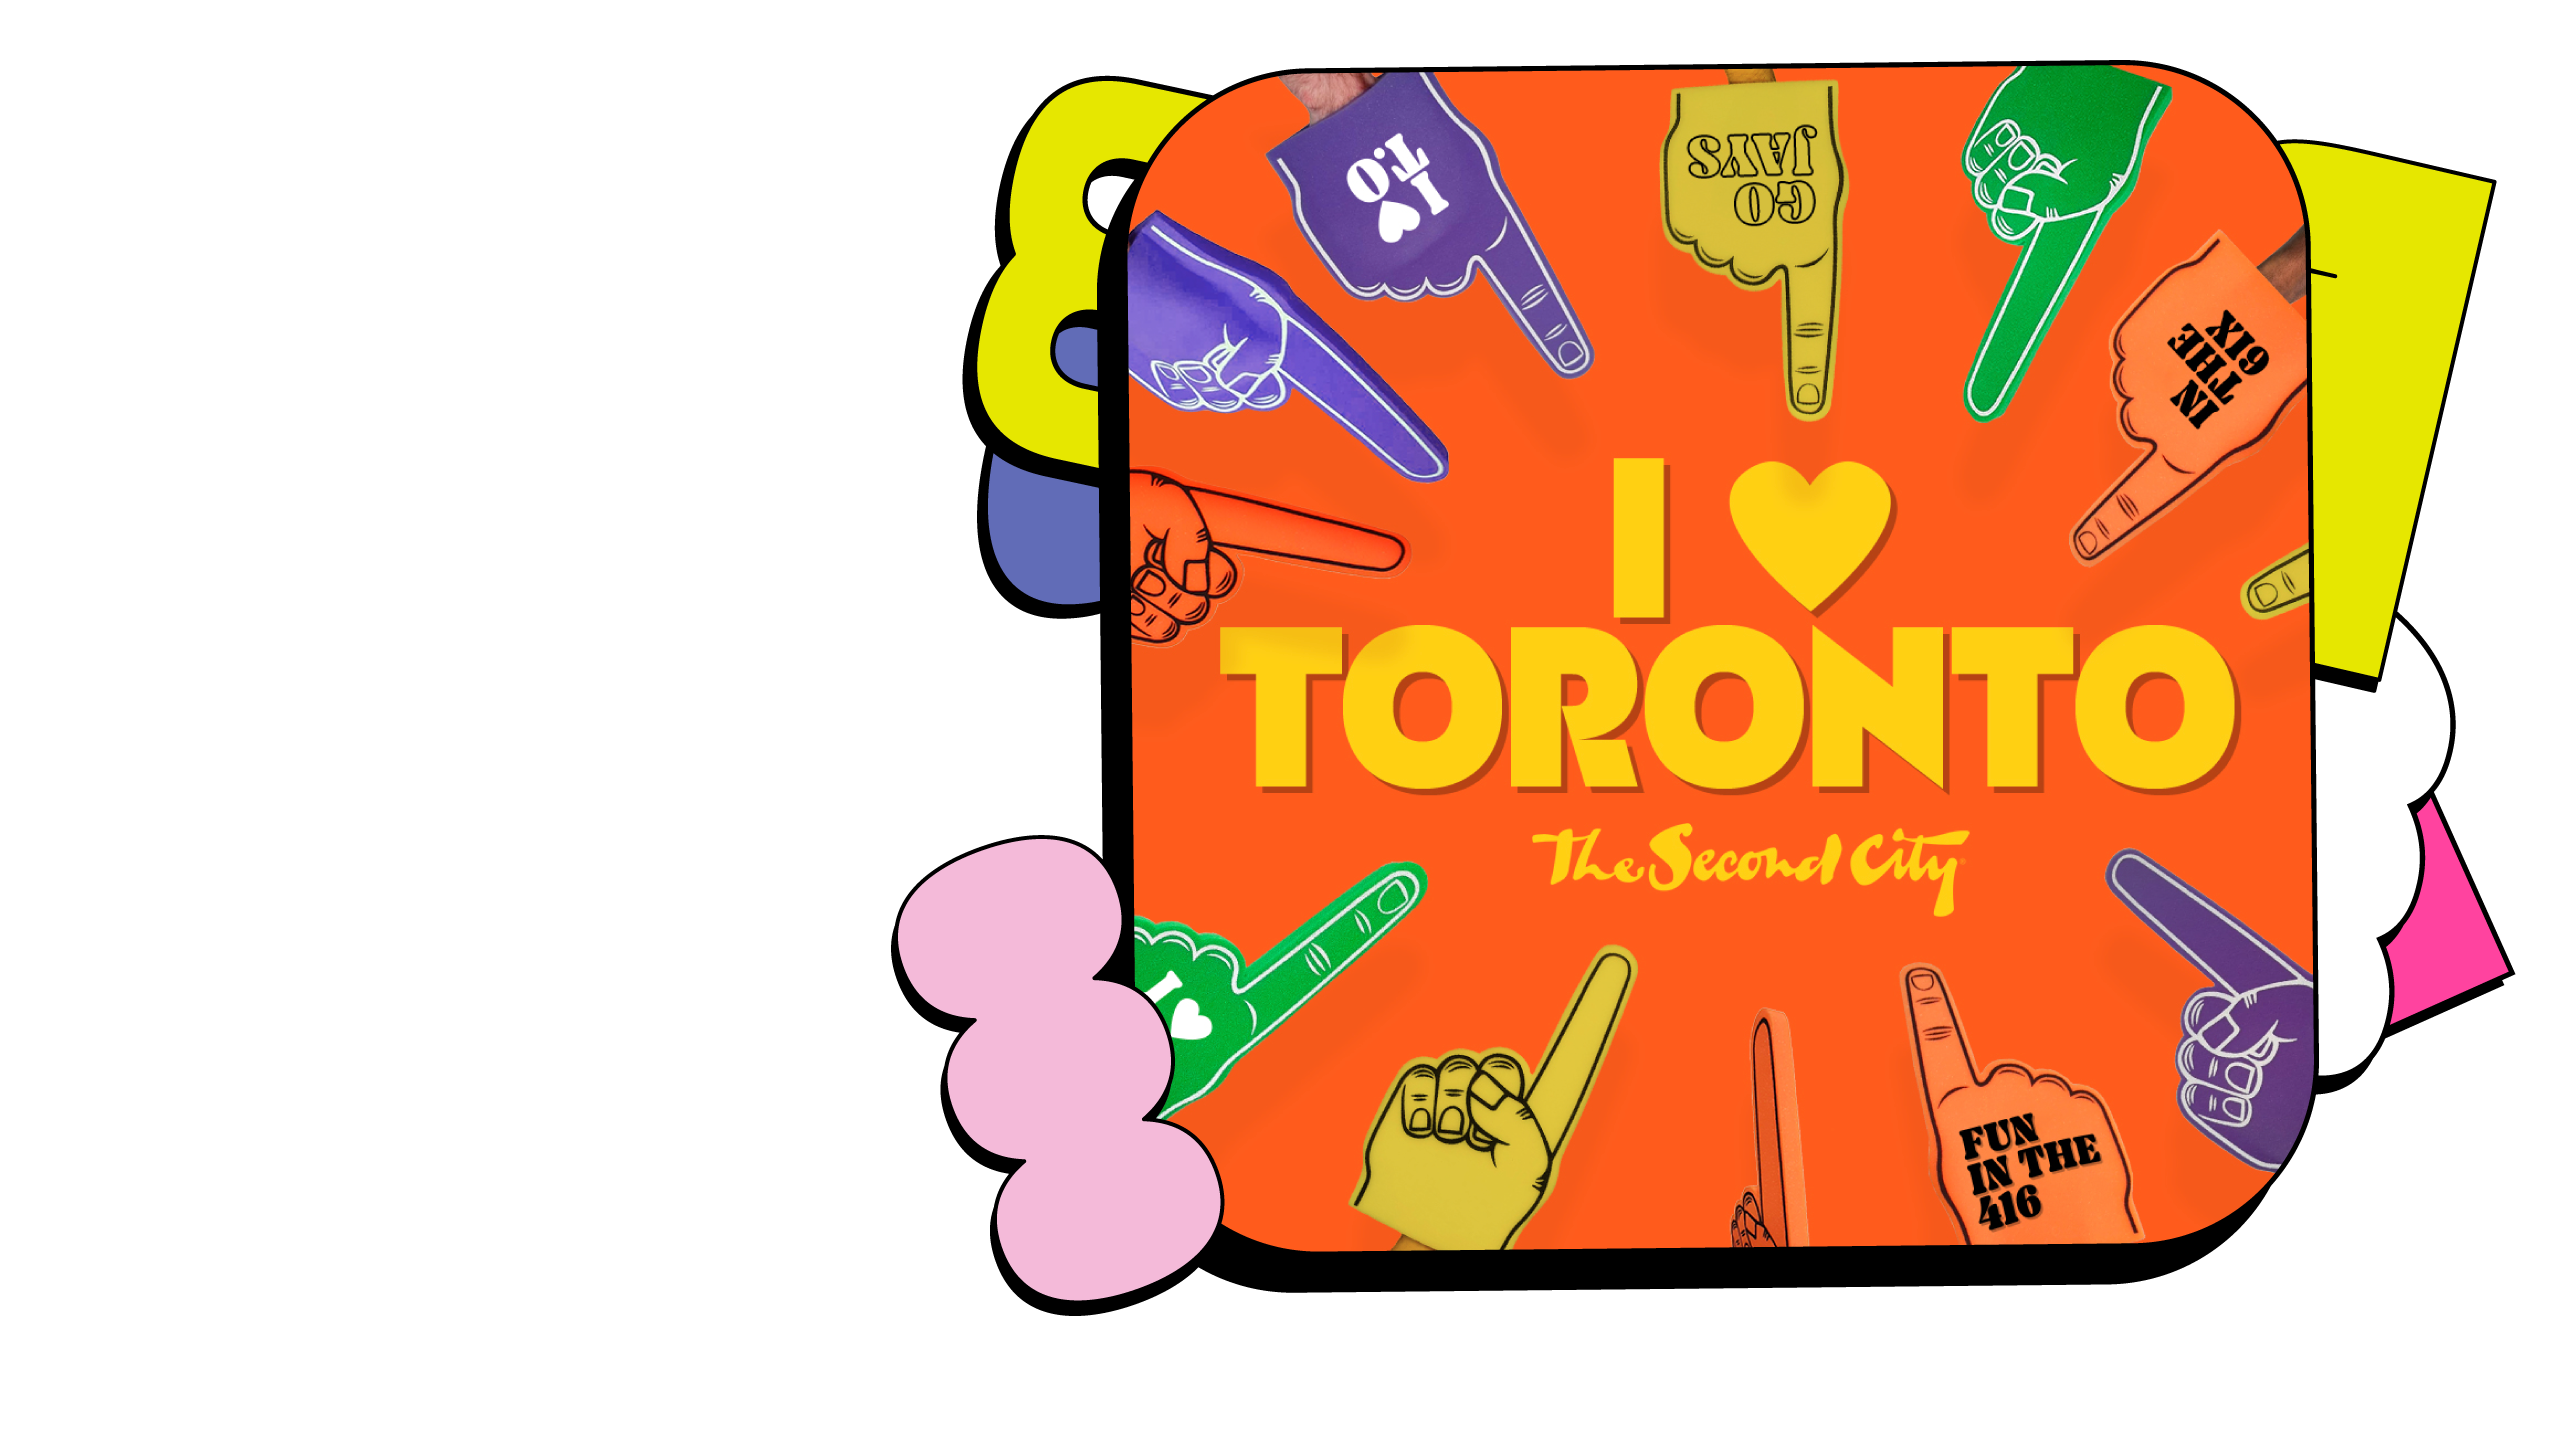 Promotional image for I <3 Toronto - Theatre '73